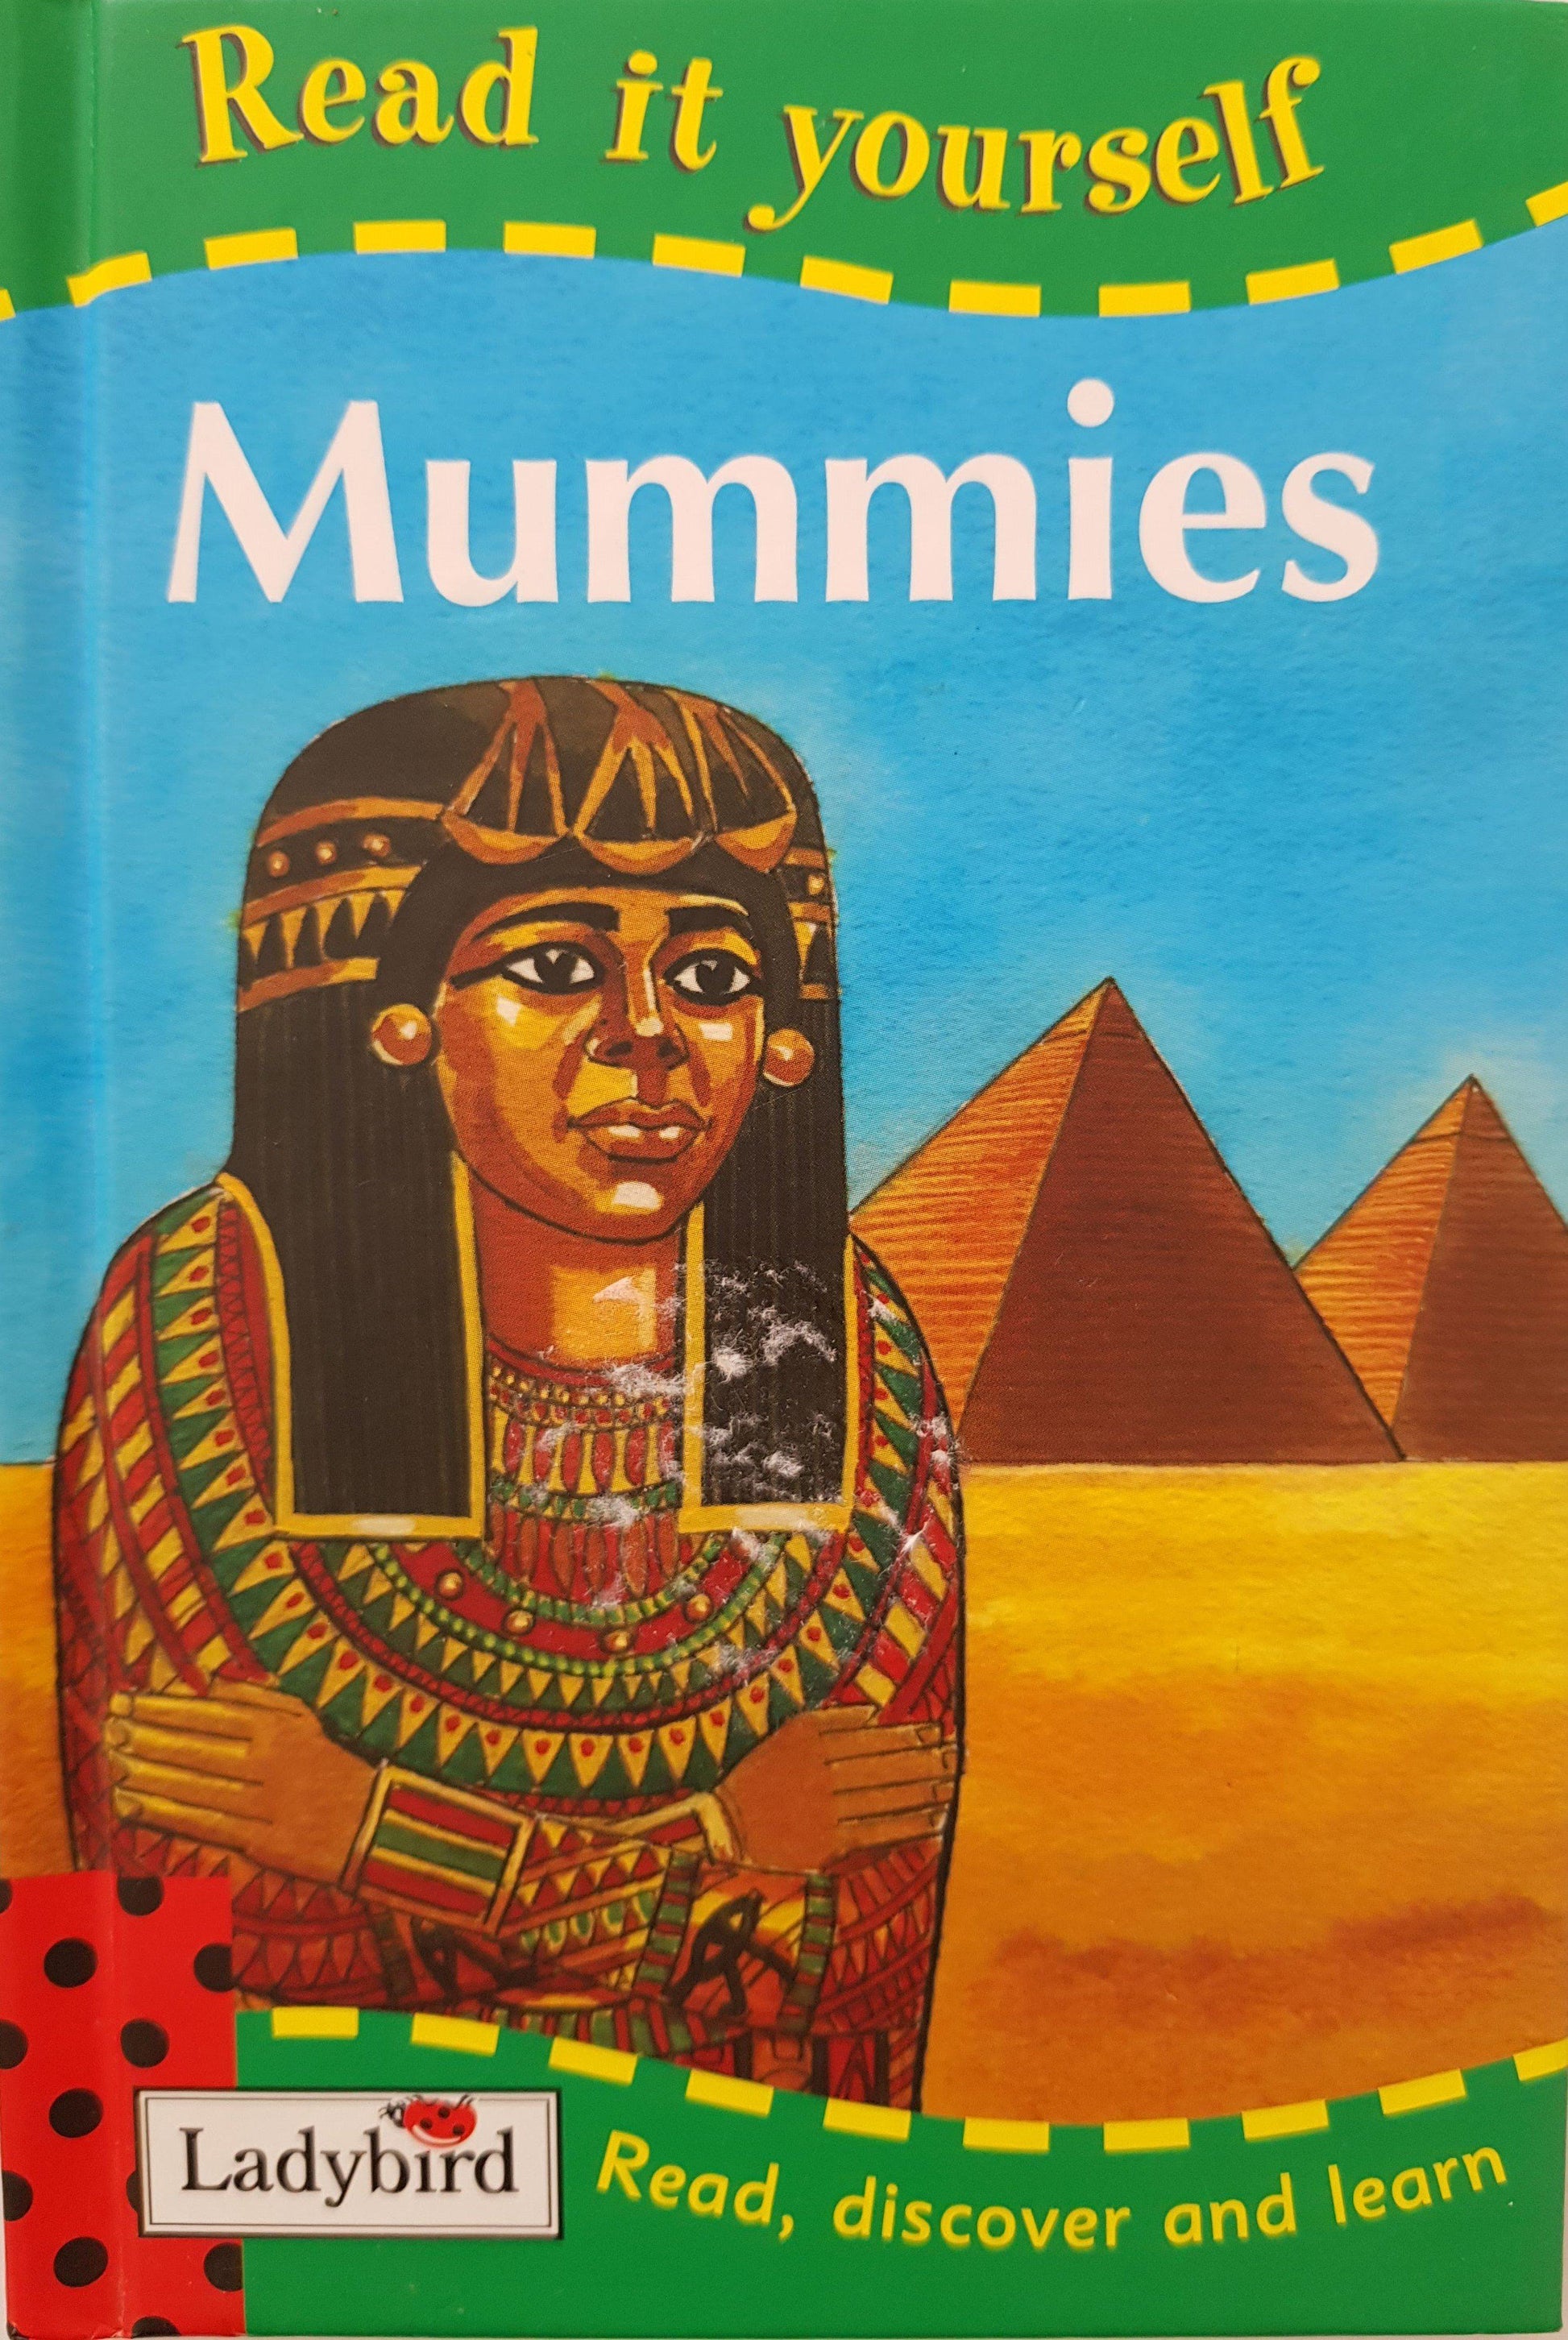 Read it Yourself - Mummies Like New Not Applicable  (4601483853879)